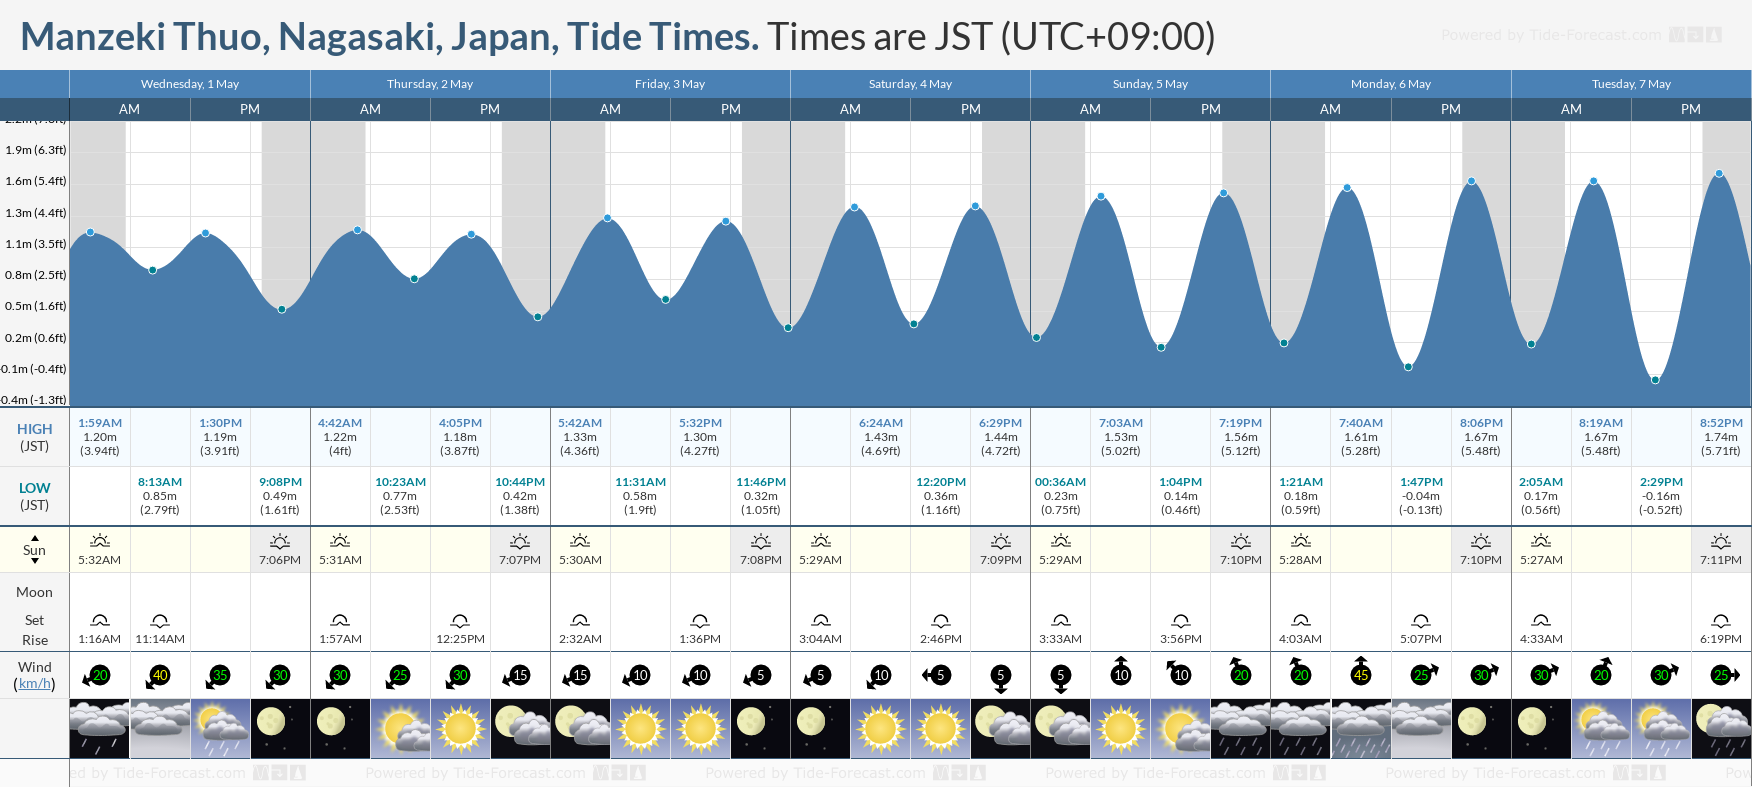 Manzeki Thuo, Nagasaki, Japan Tide Chart including high and low tide tide times for the next 7 days